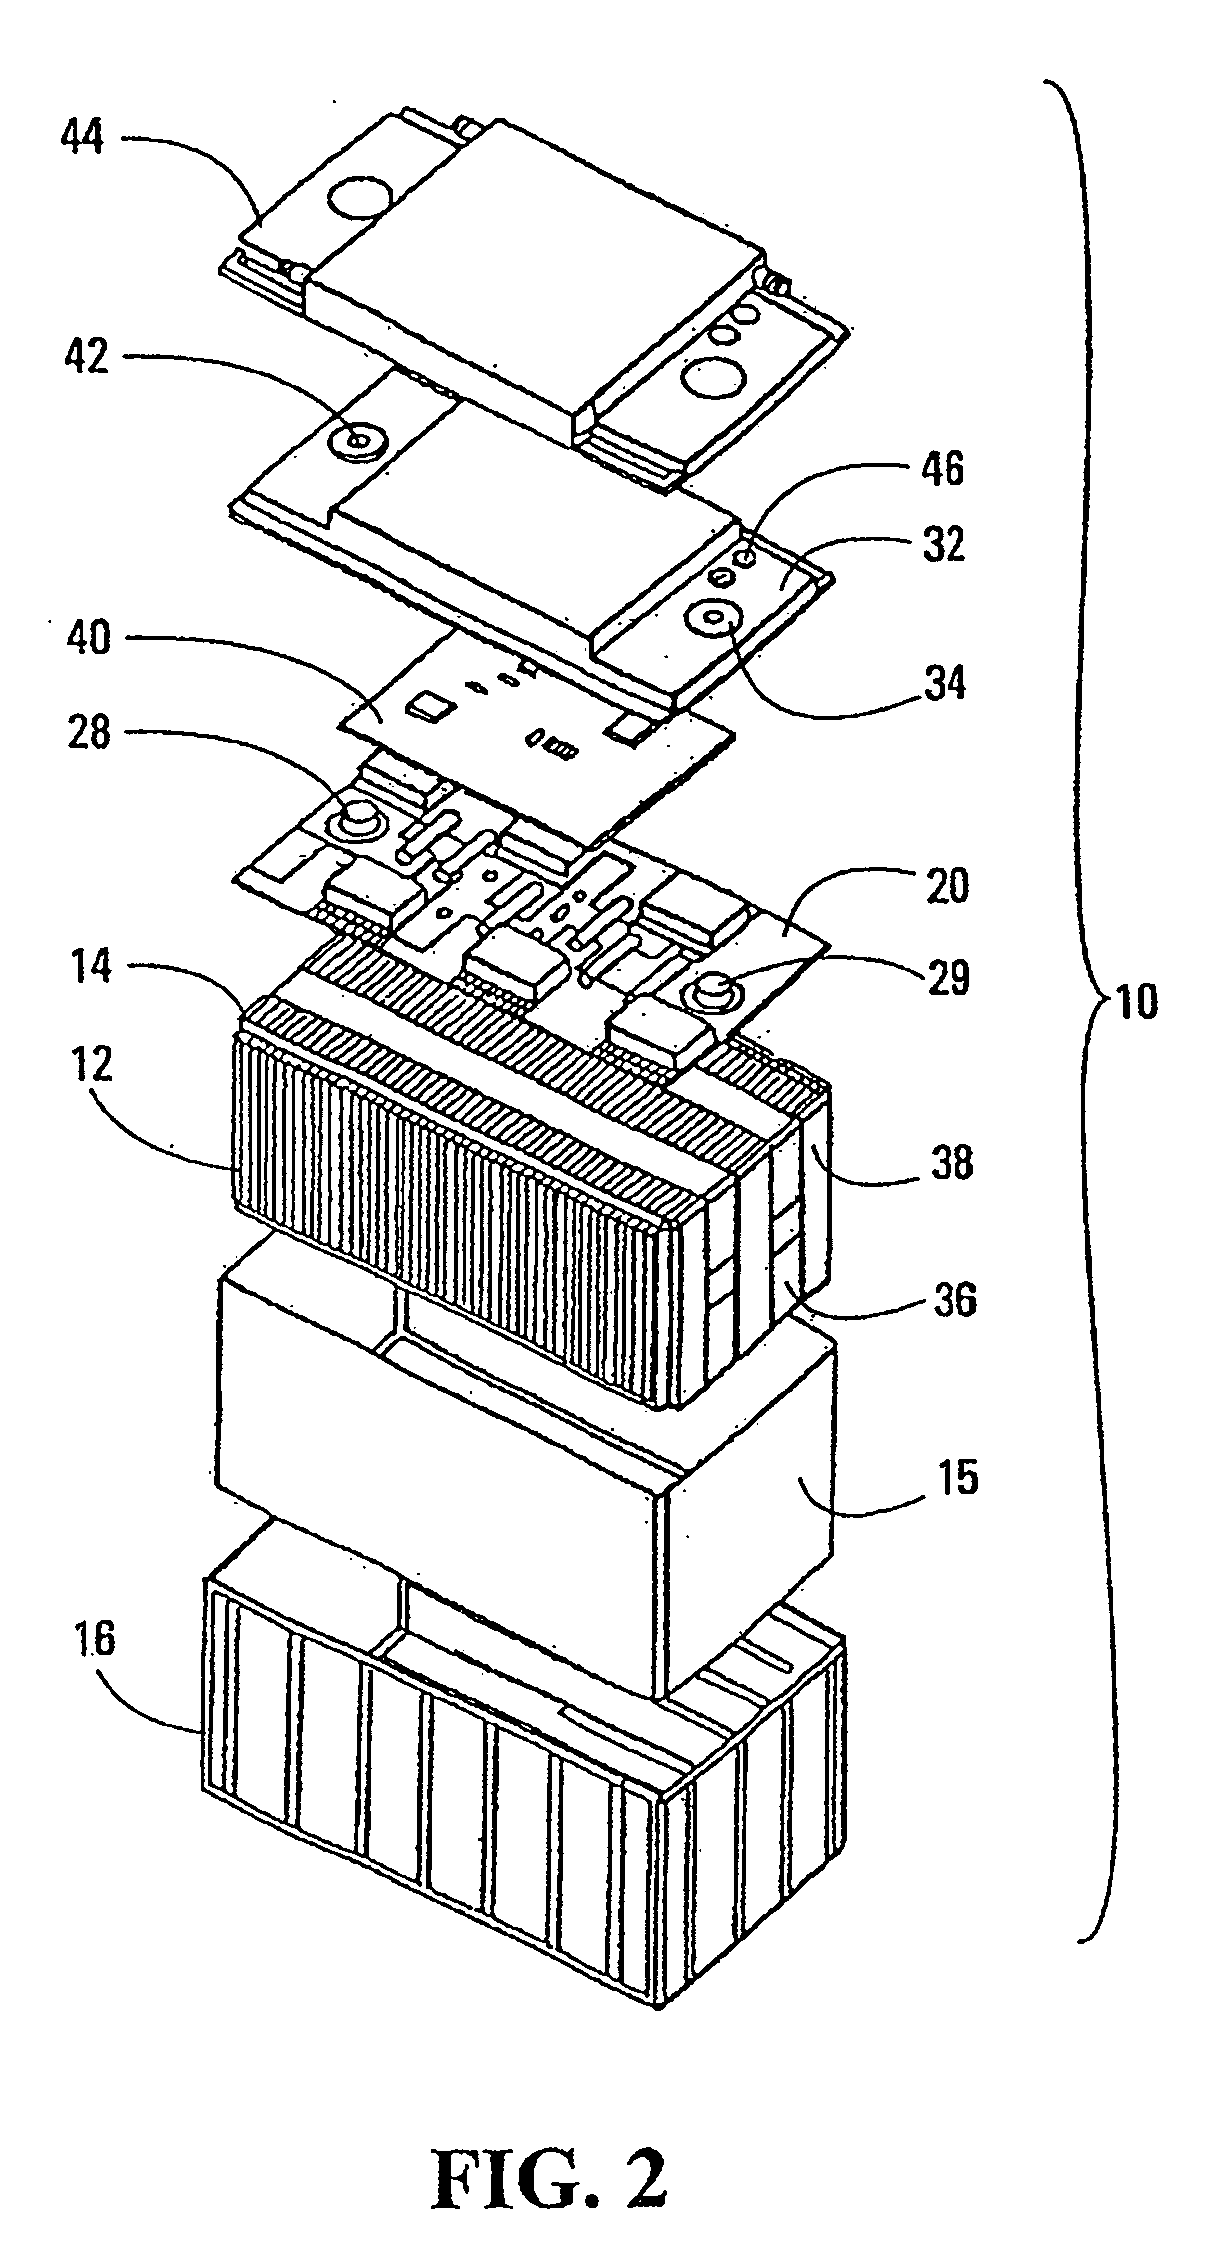 Self-diagnosis system for an energy storage device